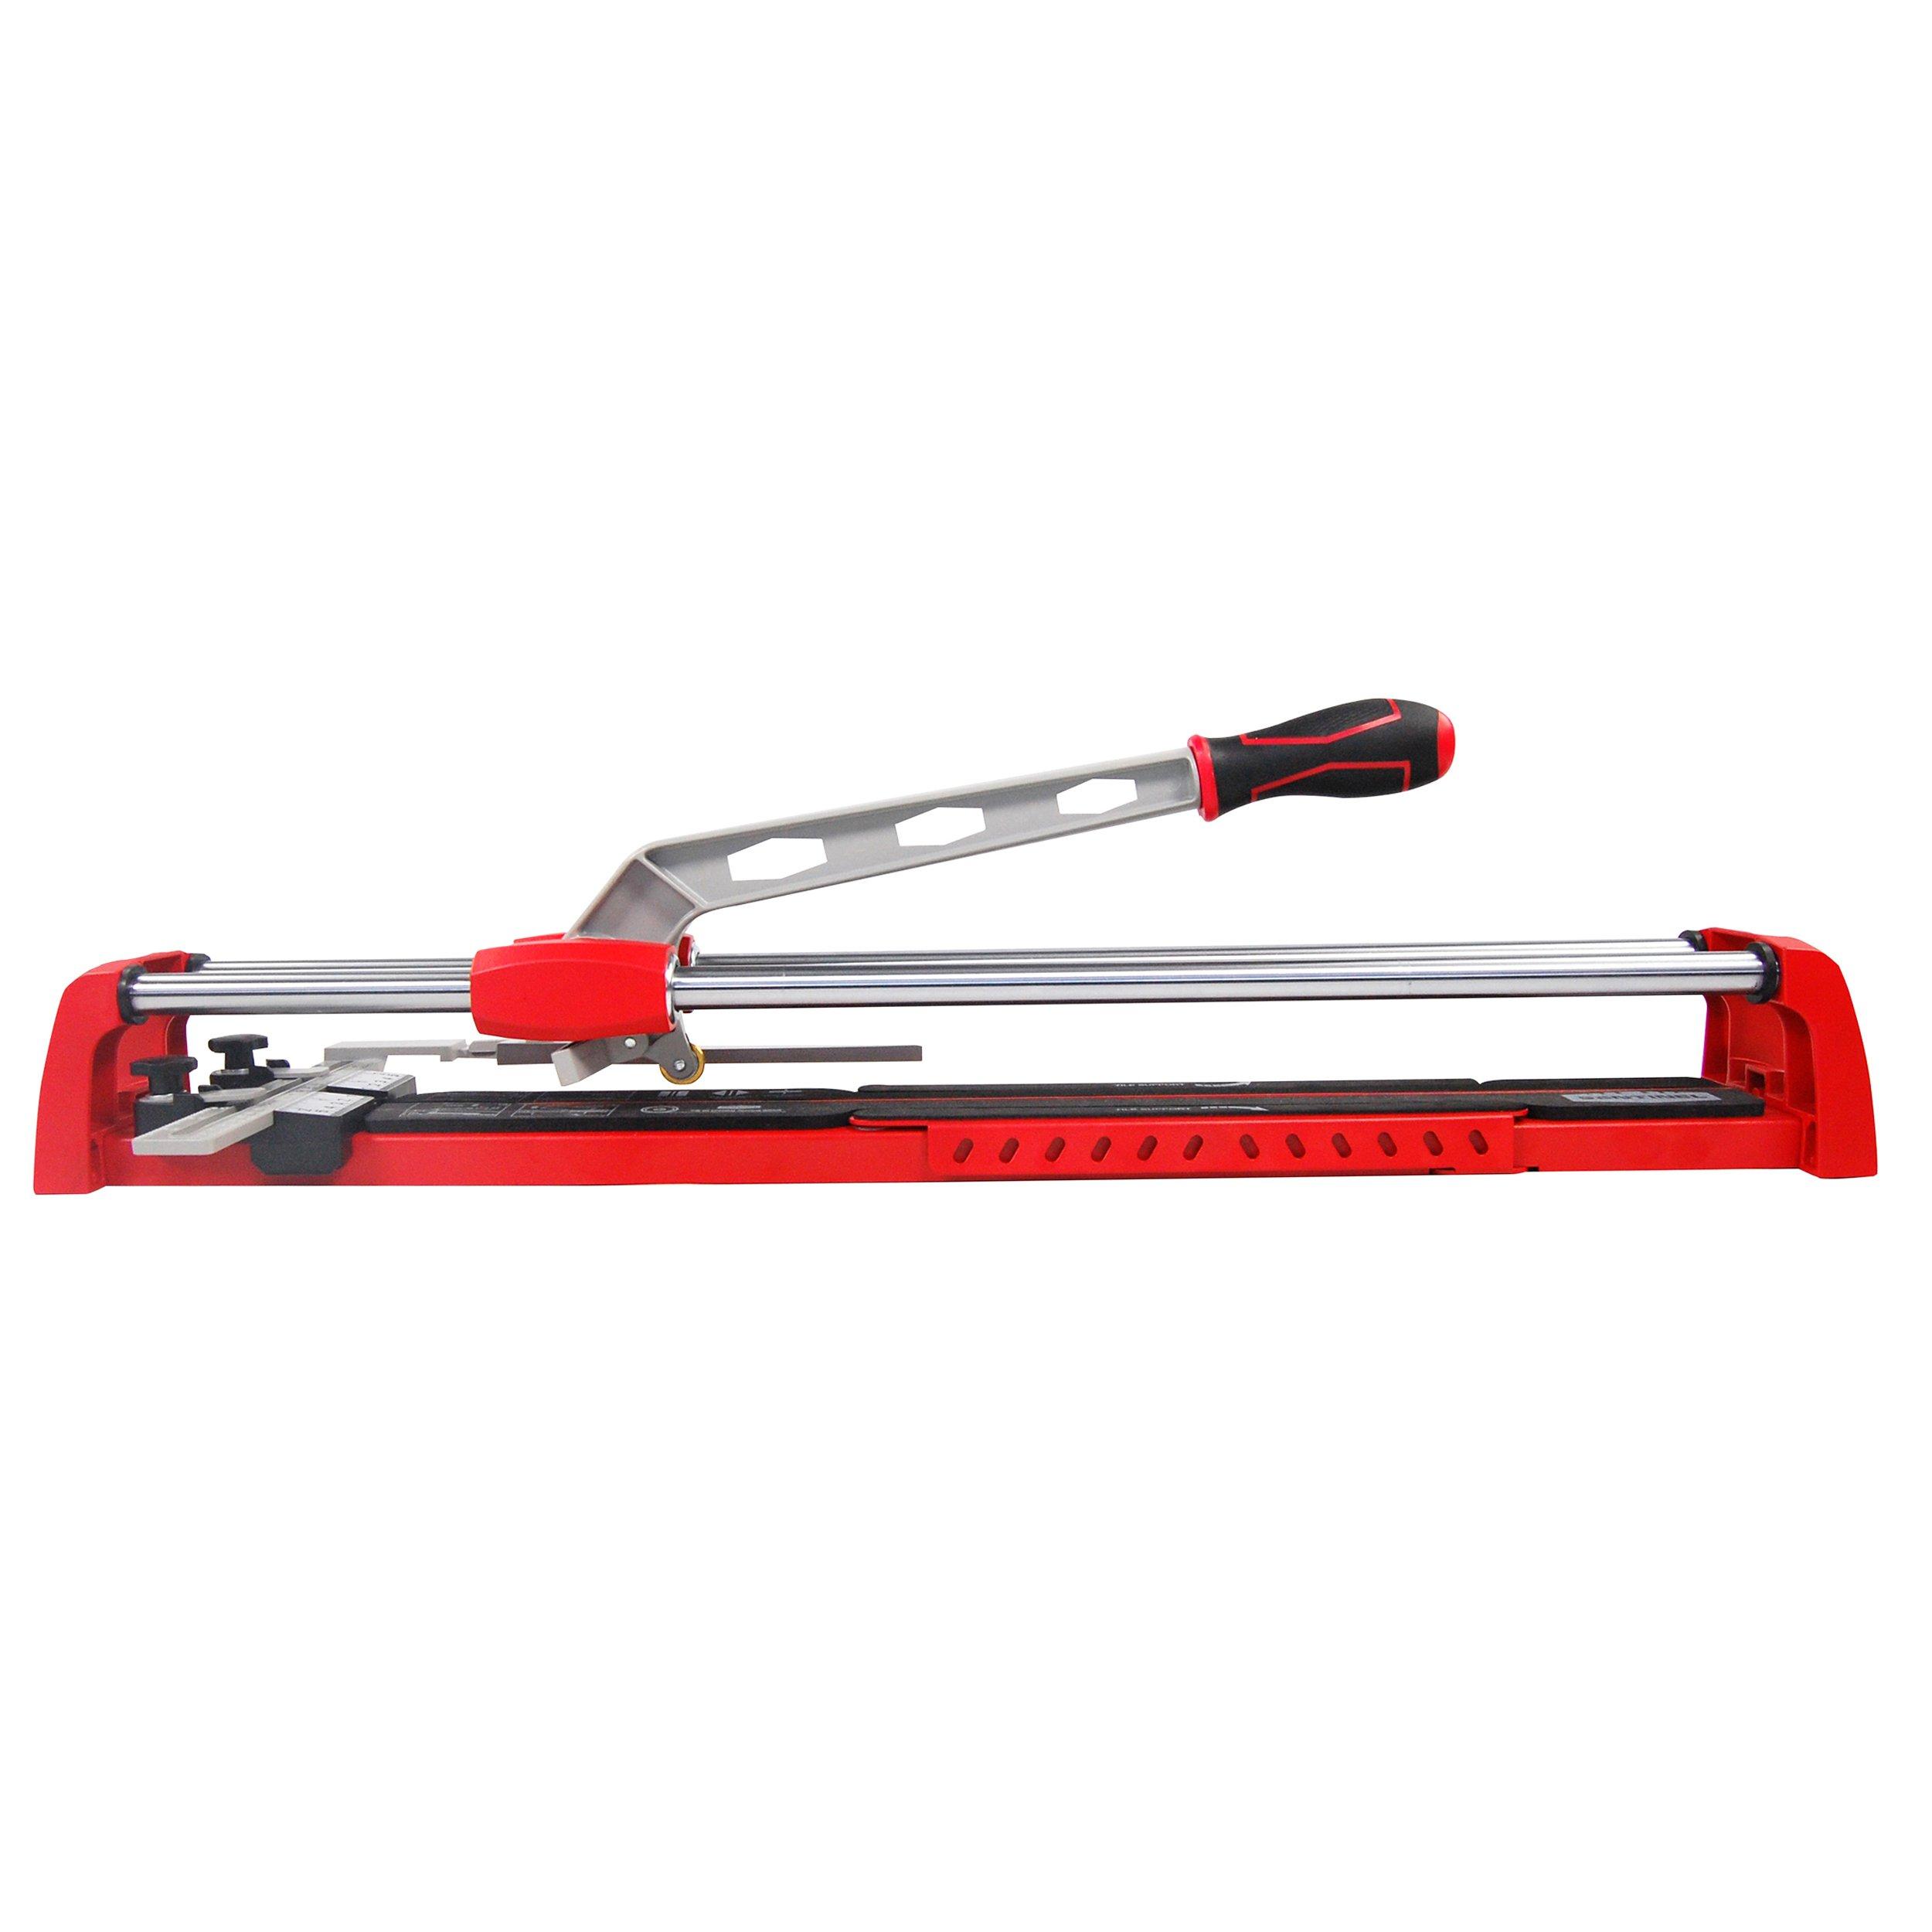 Sentinel 30in. Slim Tile Cutter with Bag